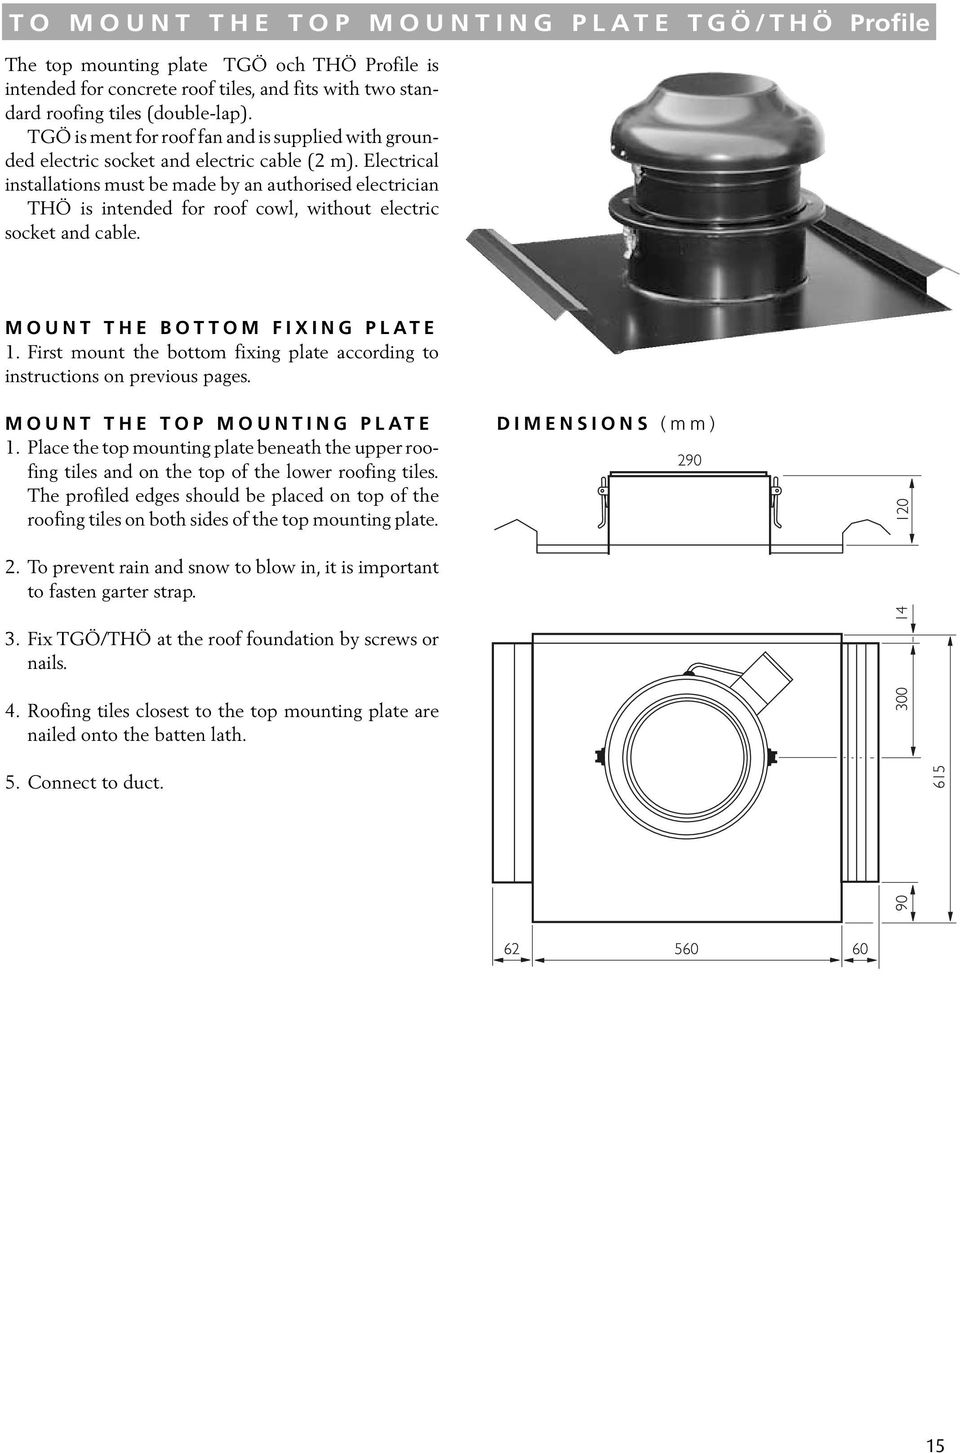 Electrical installations must be made by an authorised electrician THÖ is intended for roof cowl, without electric socket and cable. MOUNT THE BOTTOM FIXING PLATE 1.